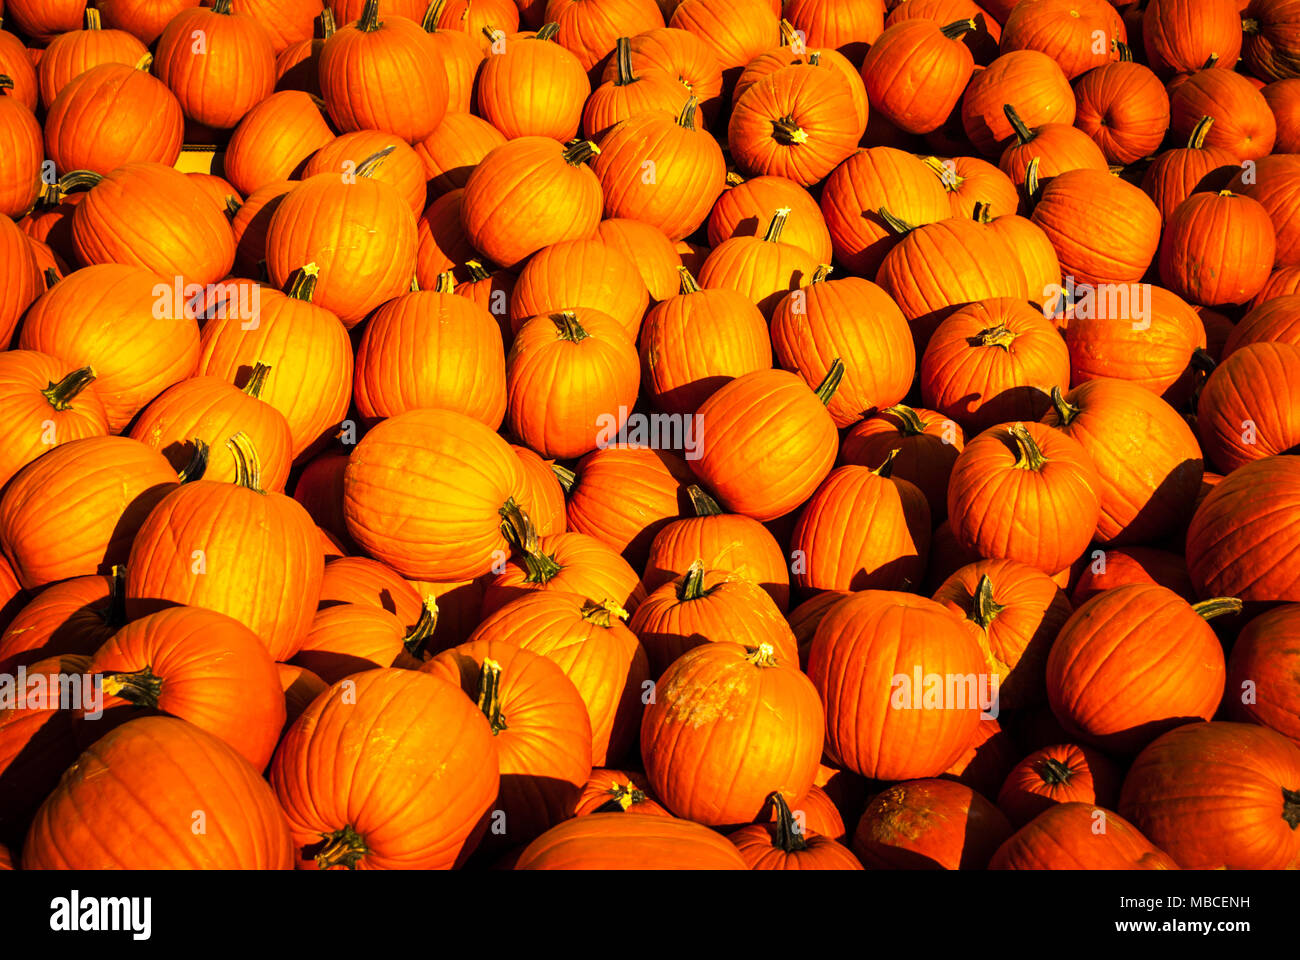 huge pile of pumpkins for Halloween or Fall decoration Stock Photo